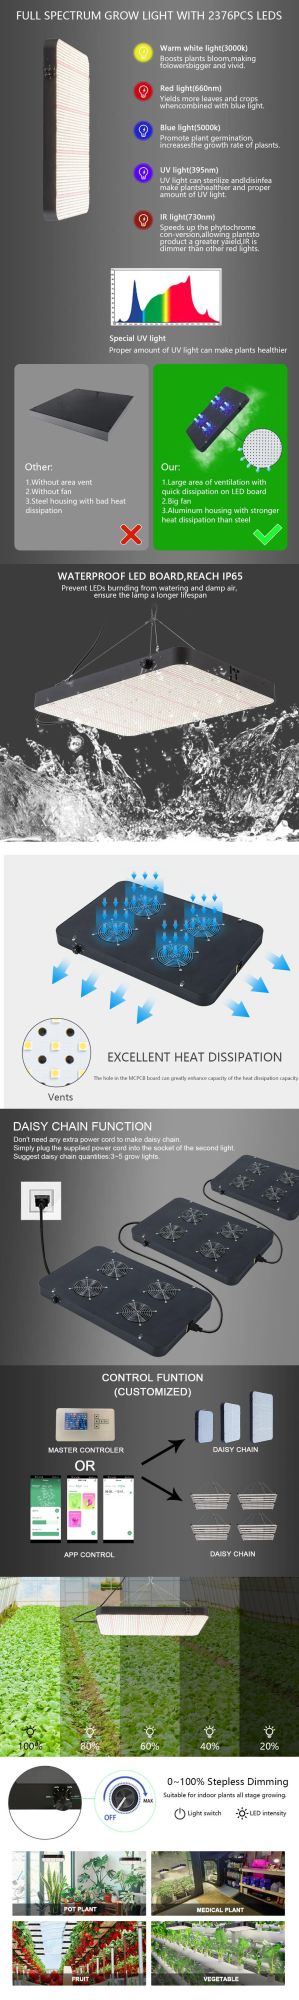 Waterproof 600 Watt 2376PCS LEDs Dimmable Full Spectrum Daisy Chain and Quiet Cooling Fan LED Lighting for Growing